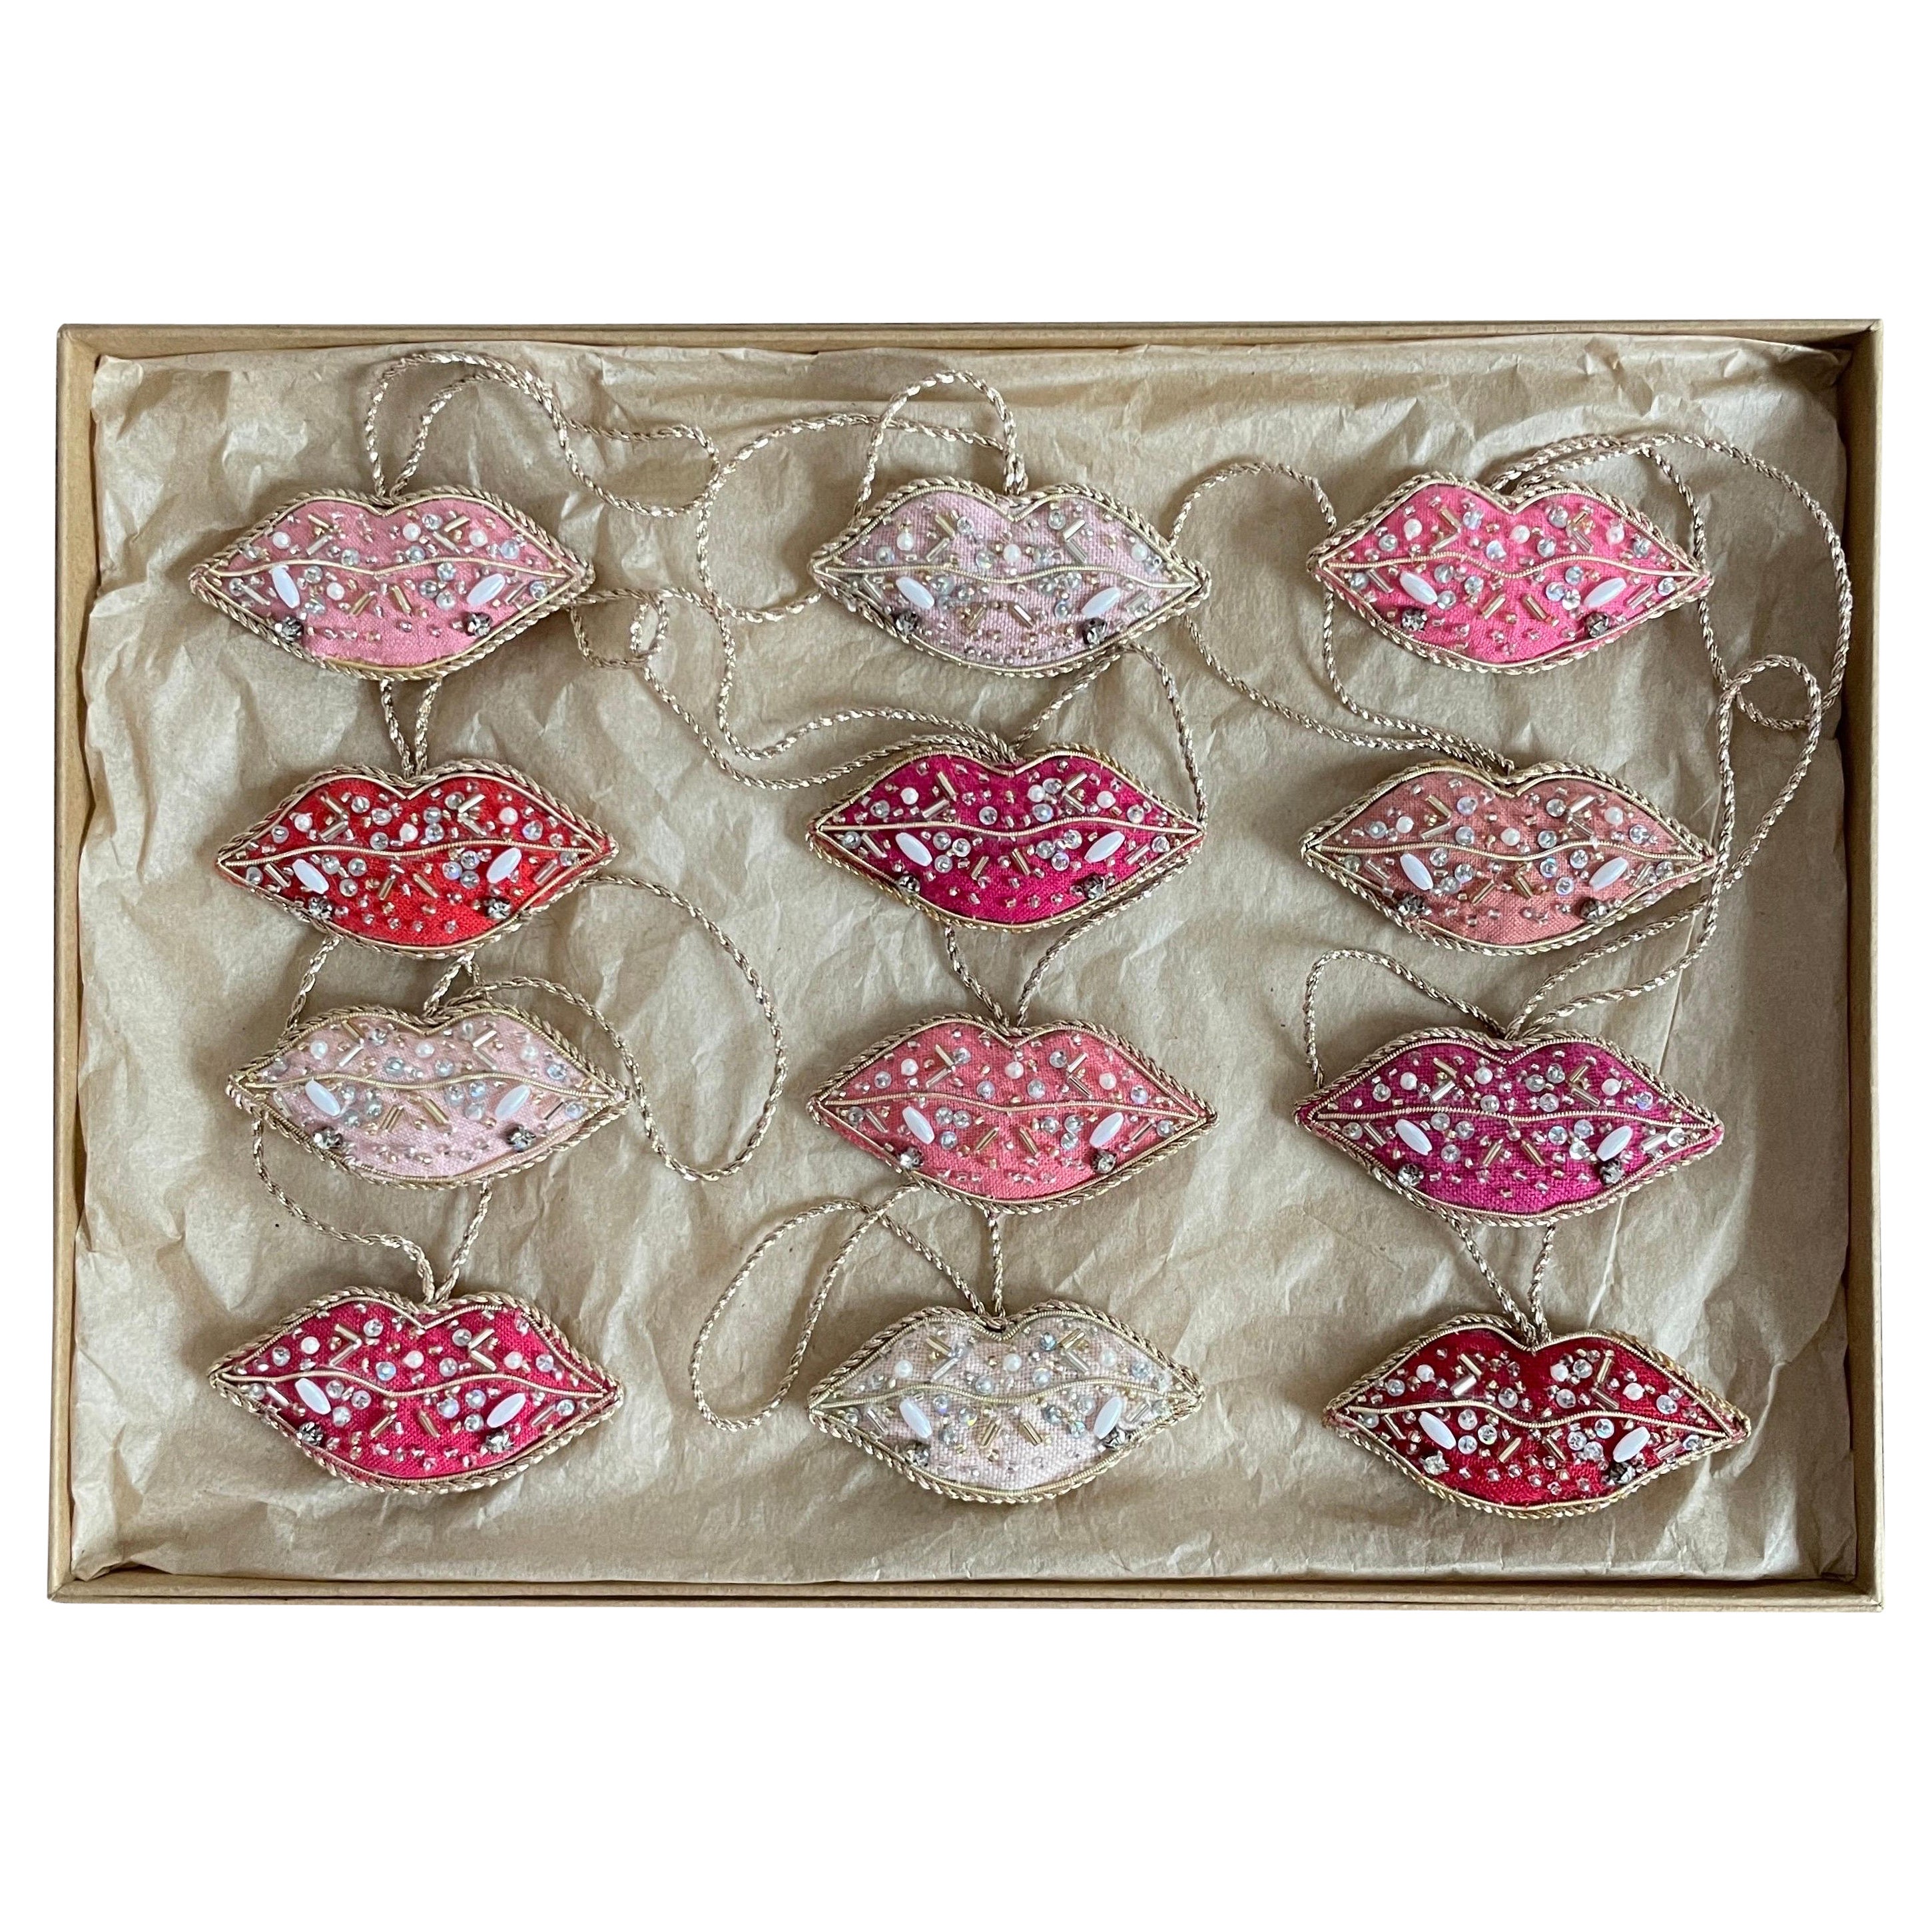 Set of 12 limited edition artisan irish linen lips ornaments in pinks and valentine’s day reds by Katie Larmour.

This is a luxury box set of artisan made decorative ornaments created with authentic Irish Linen, exclusive to 1stdibs. They are